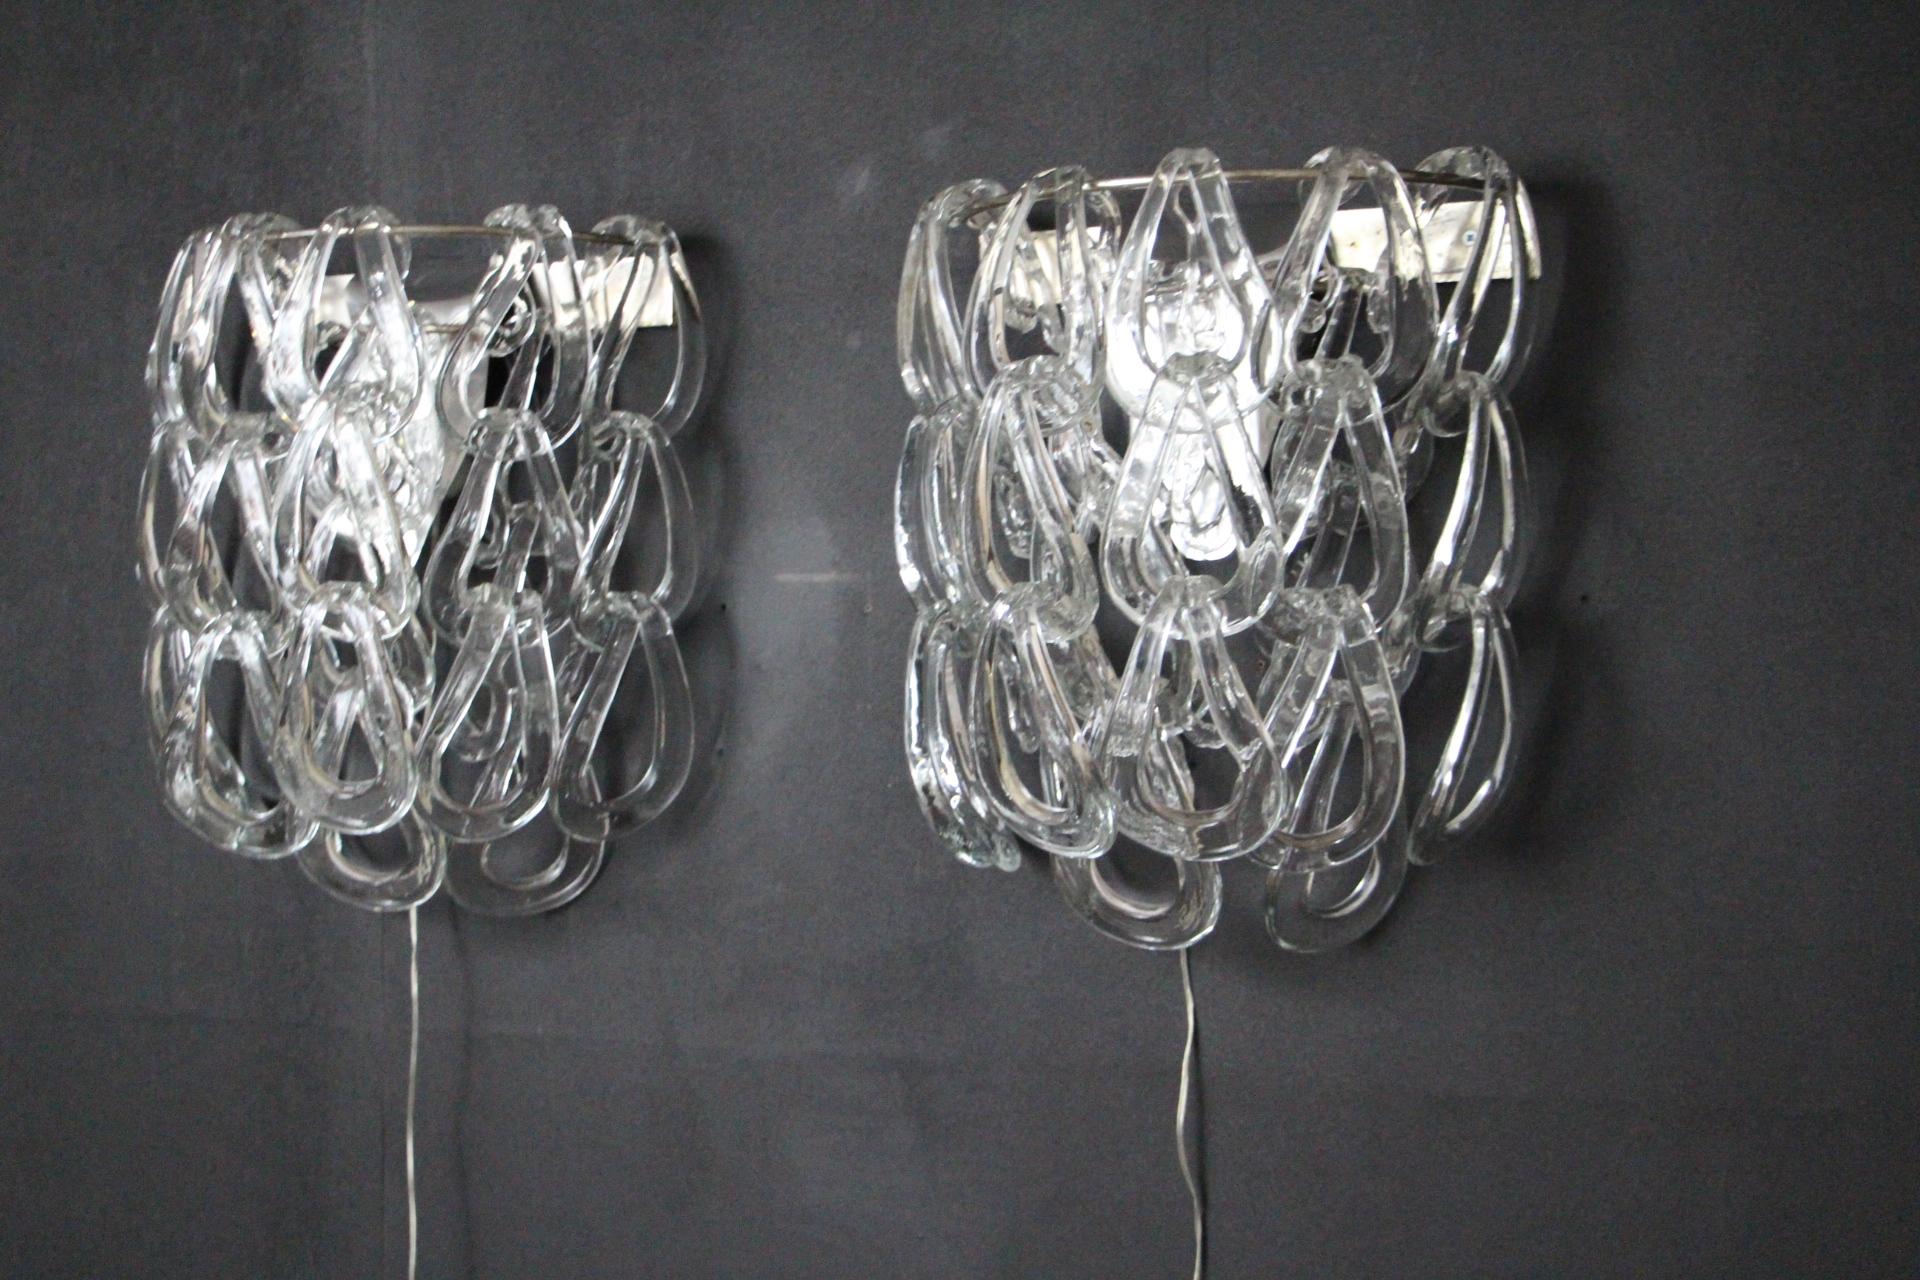 Italian Pair of Clear Murano Glass Sconces by Angelo Mangiarotti for Vistosi, Wall Light For Sale